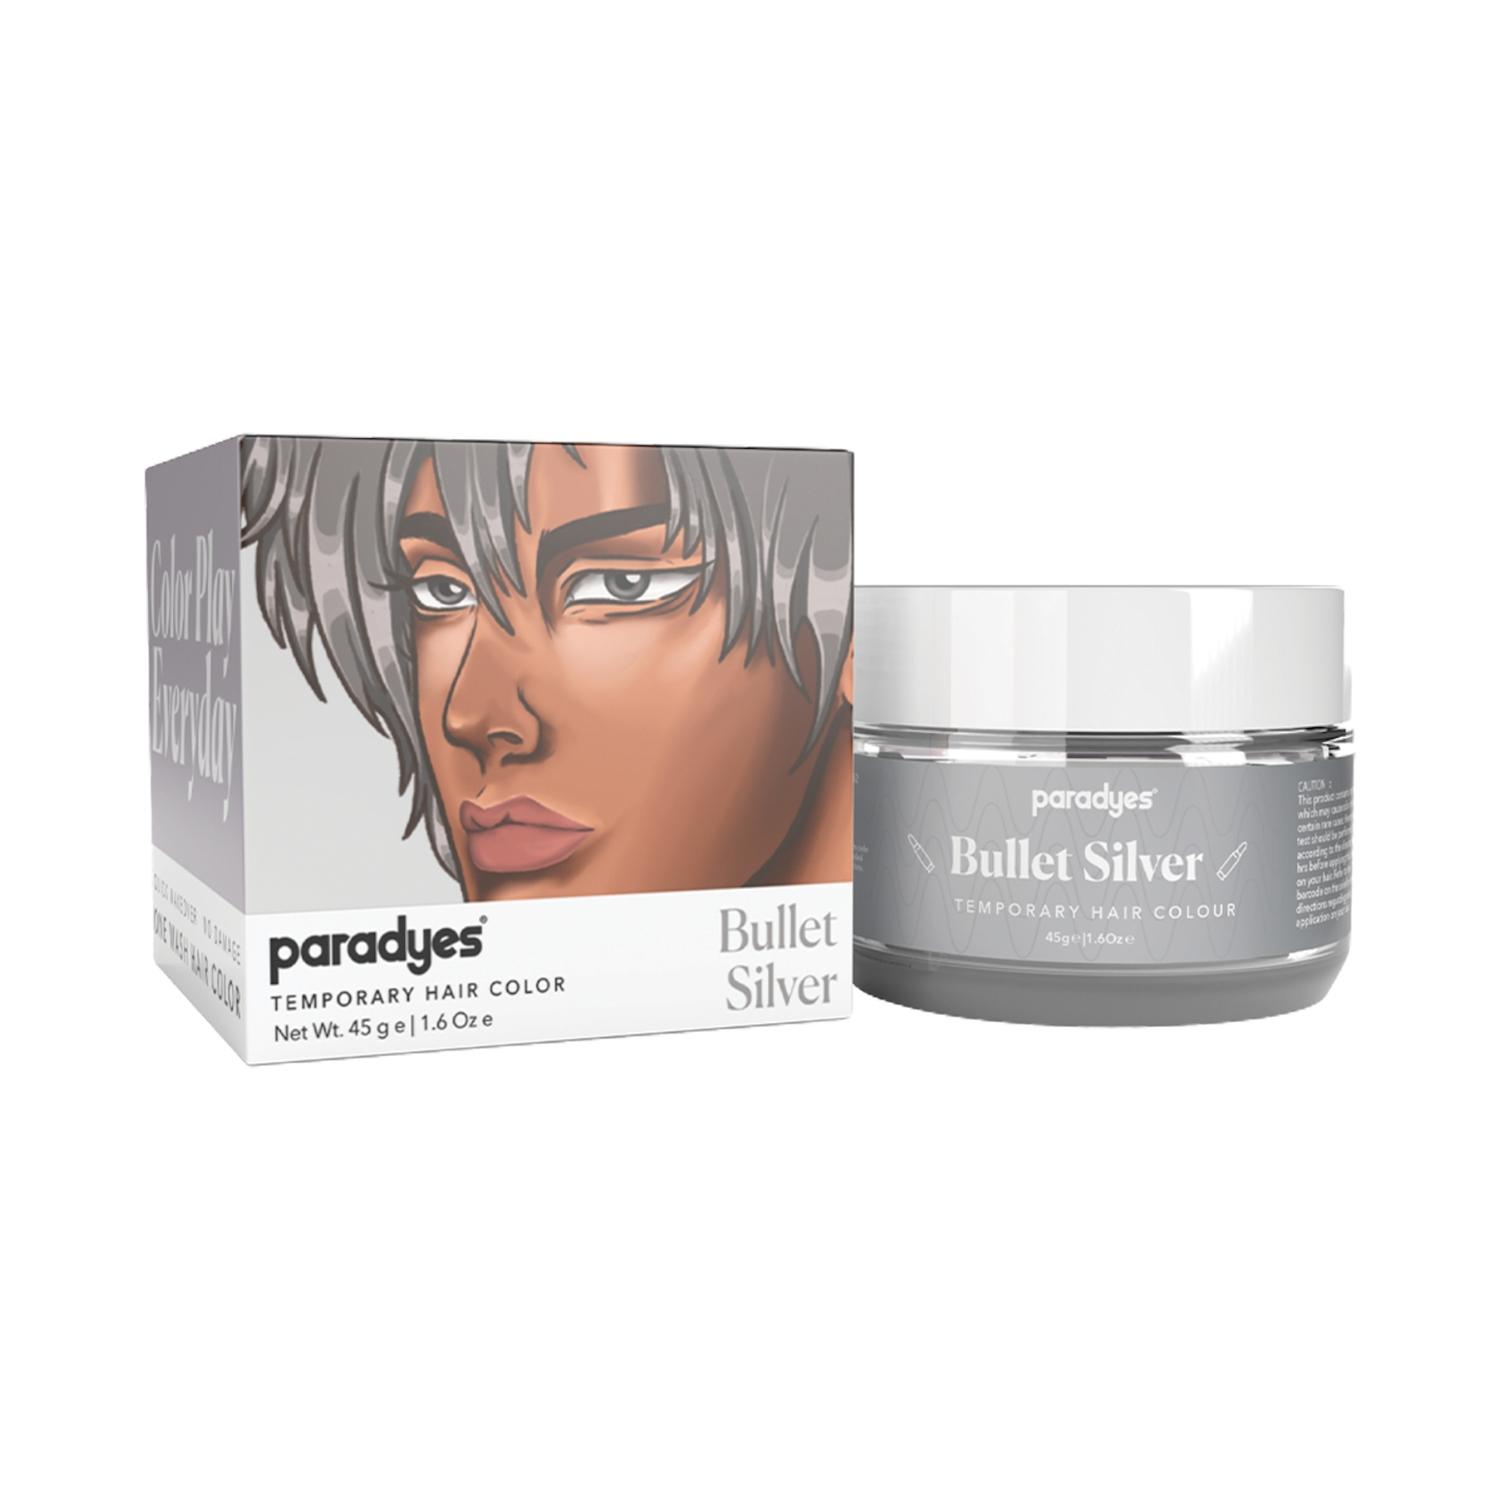 paradyes-temporary-one-wash-hair-color---bullet-silver-(45g)